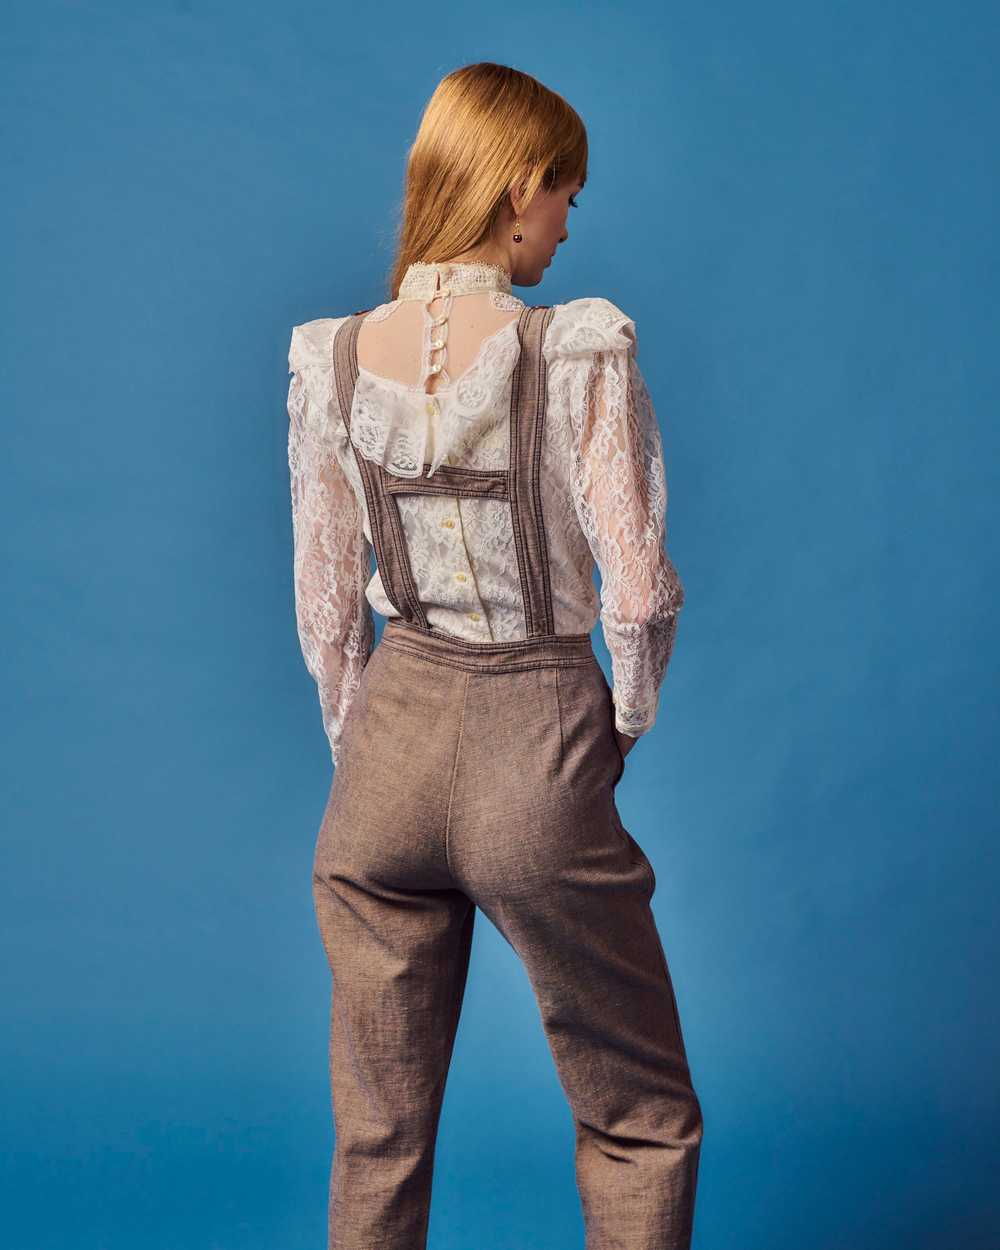 70's Faded Glory Overalls - image 5